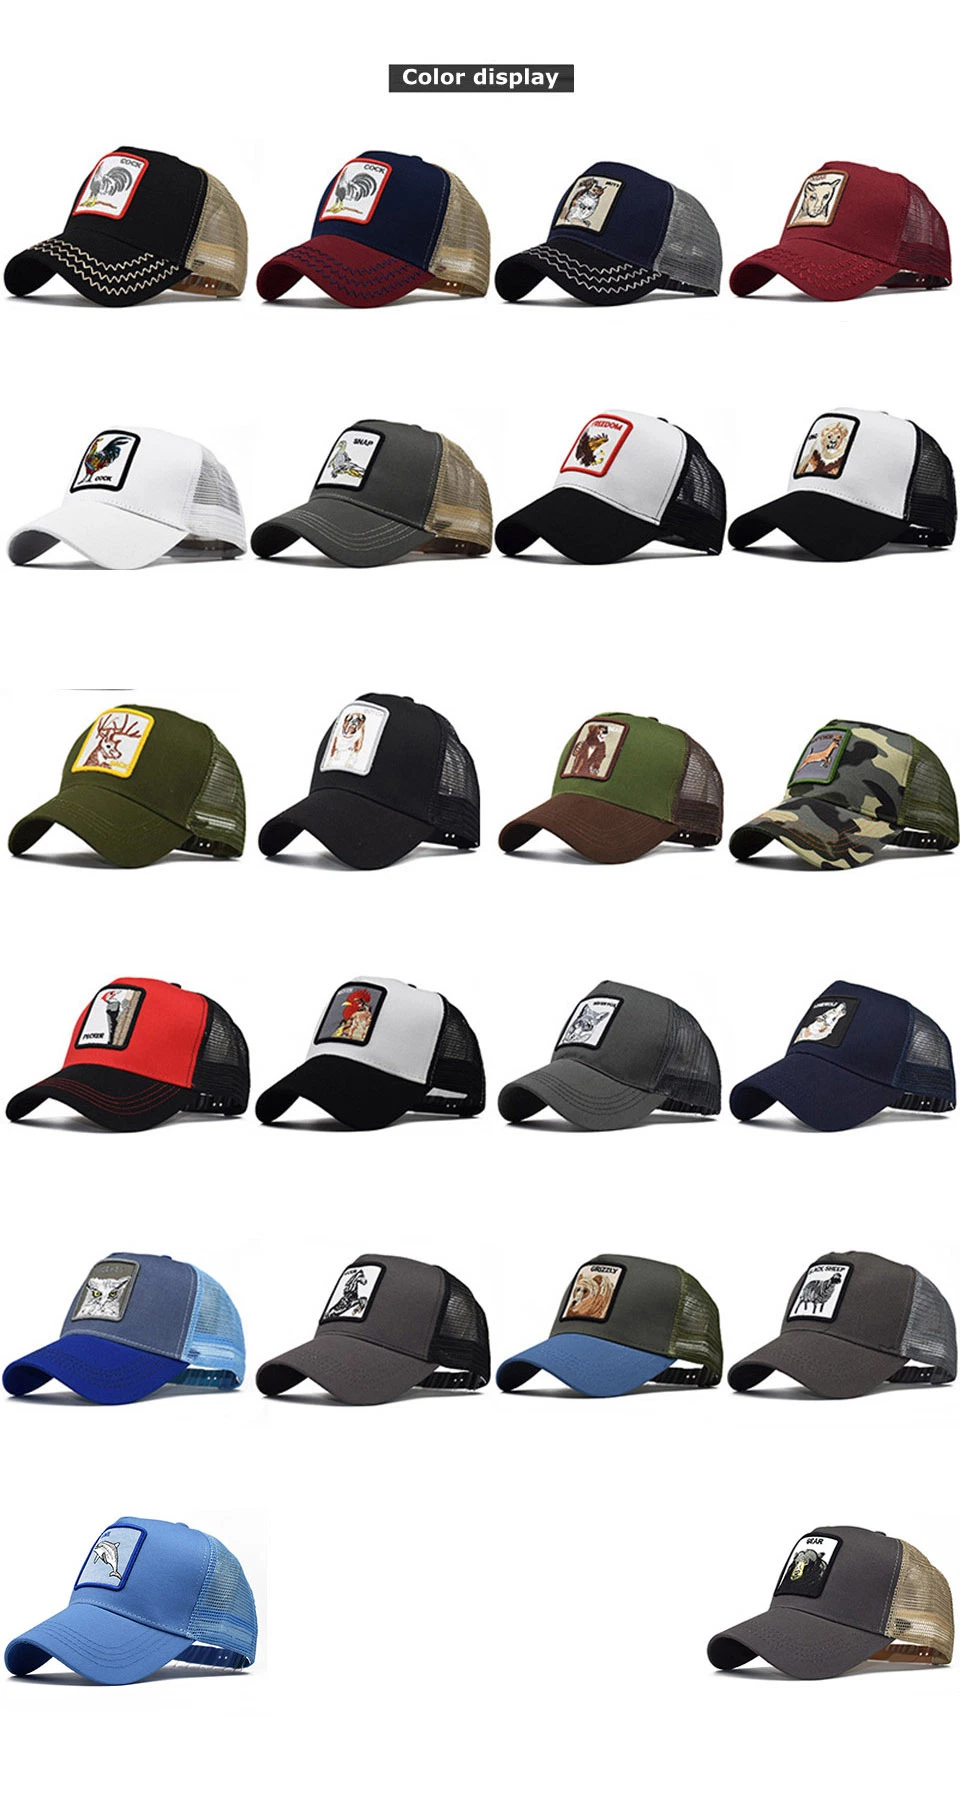 Personalized 3D Embroidered Snapback Hats